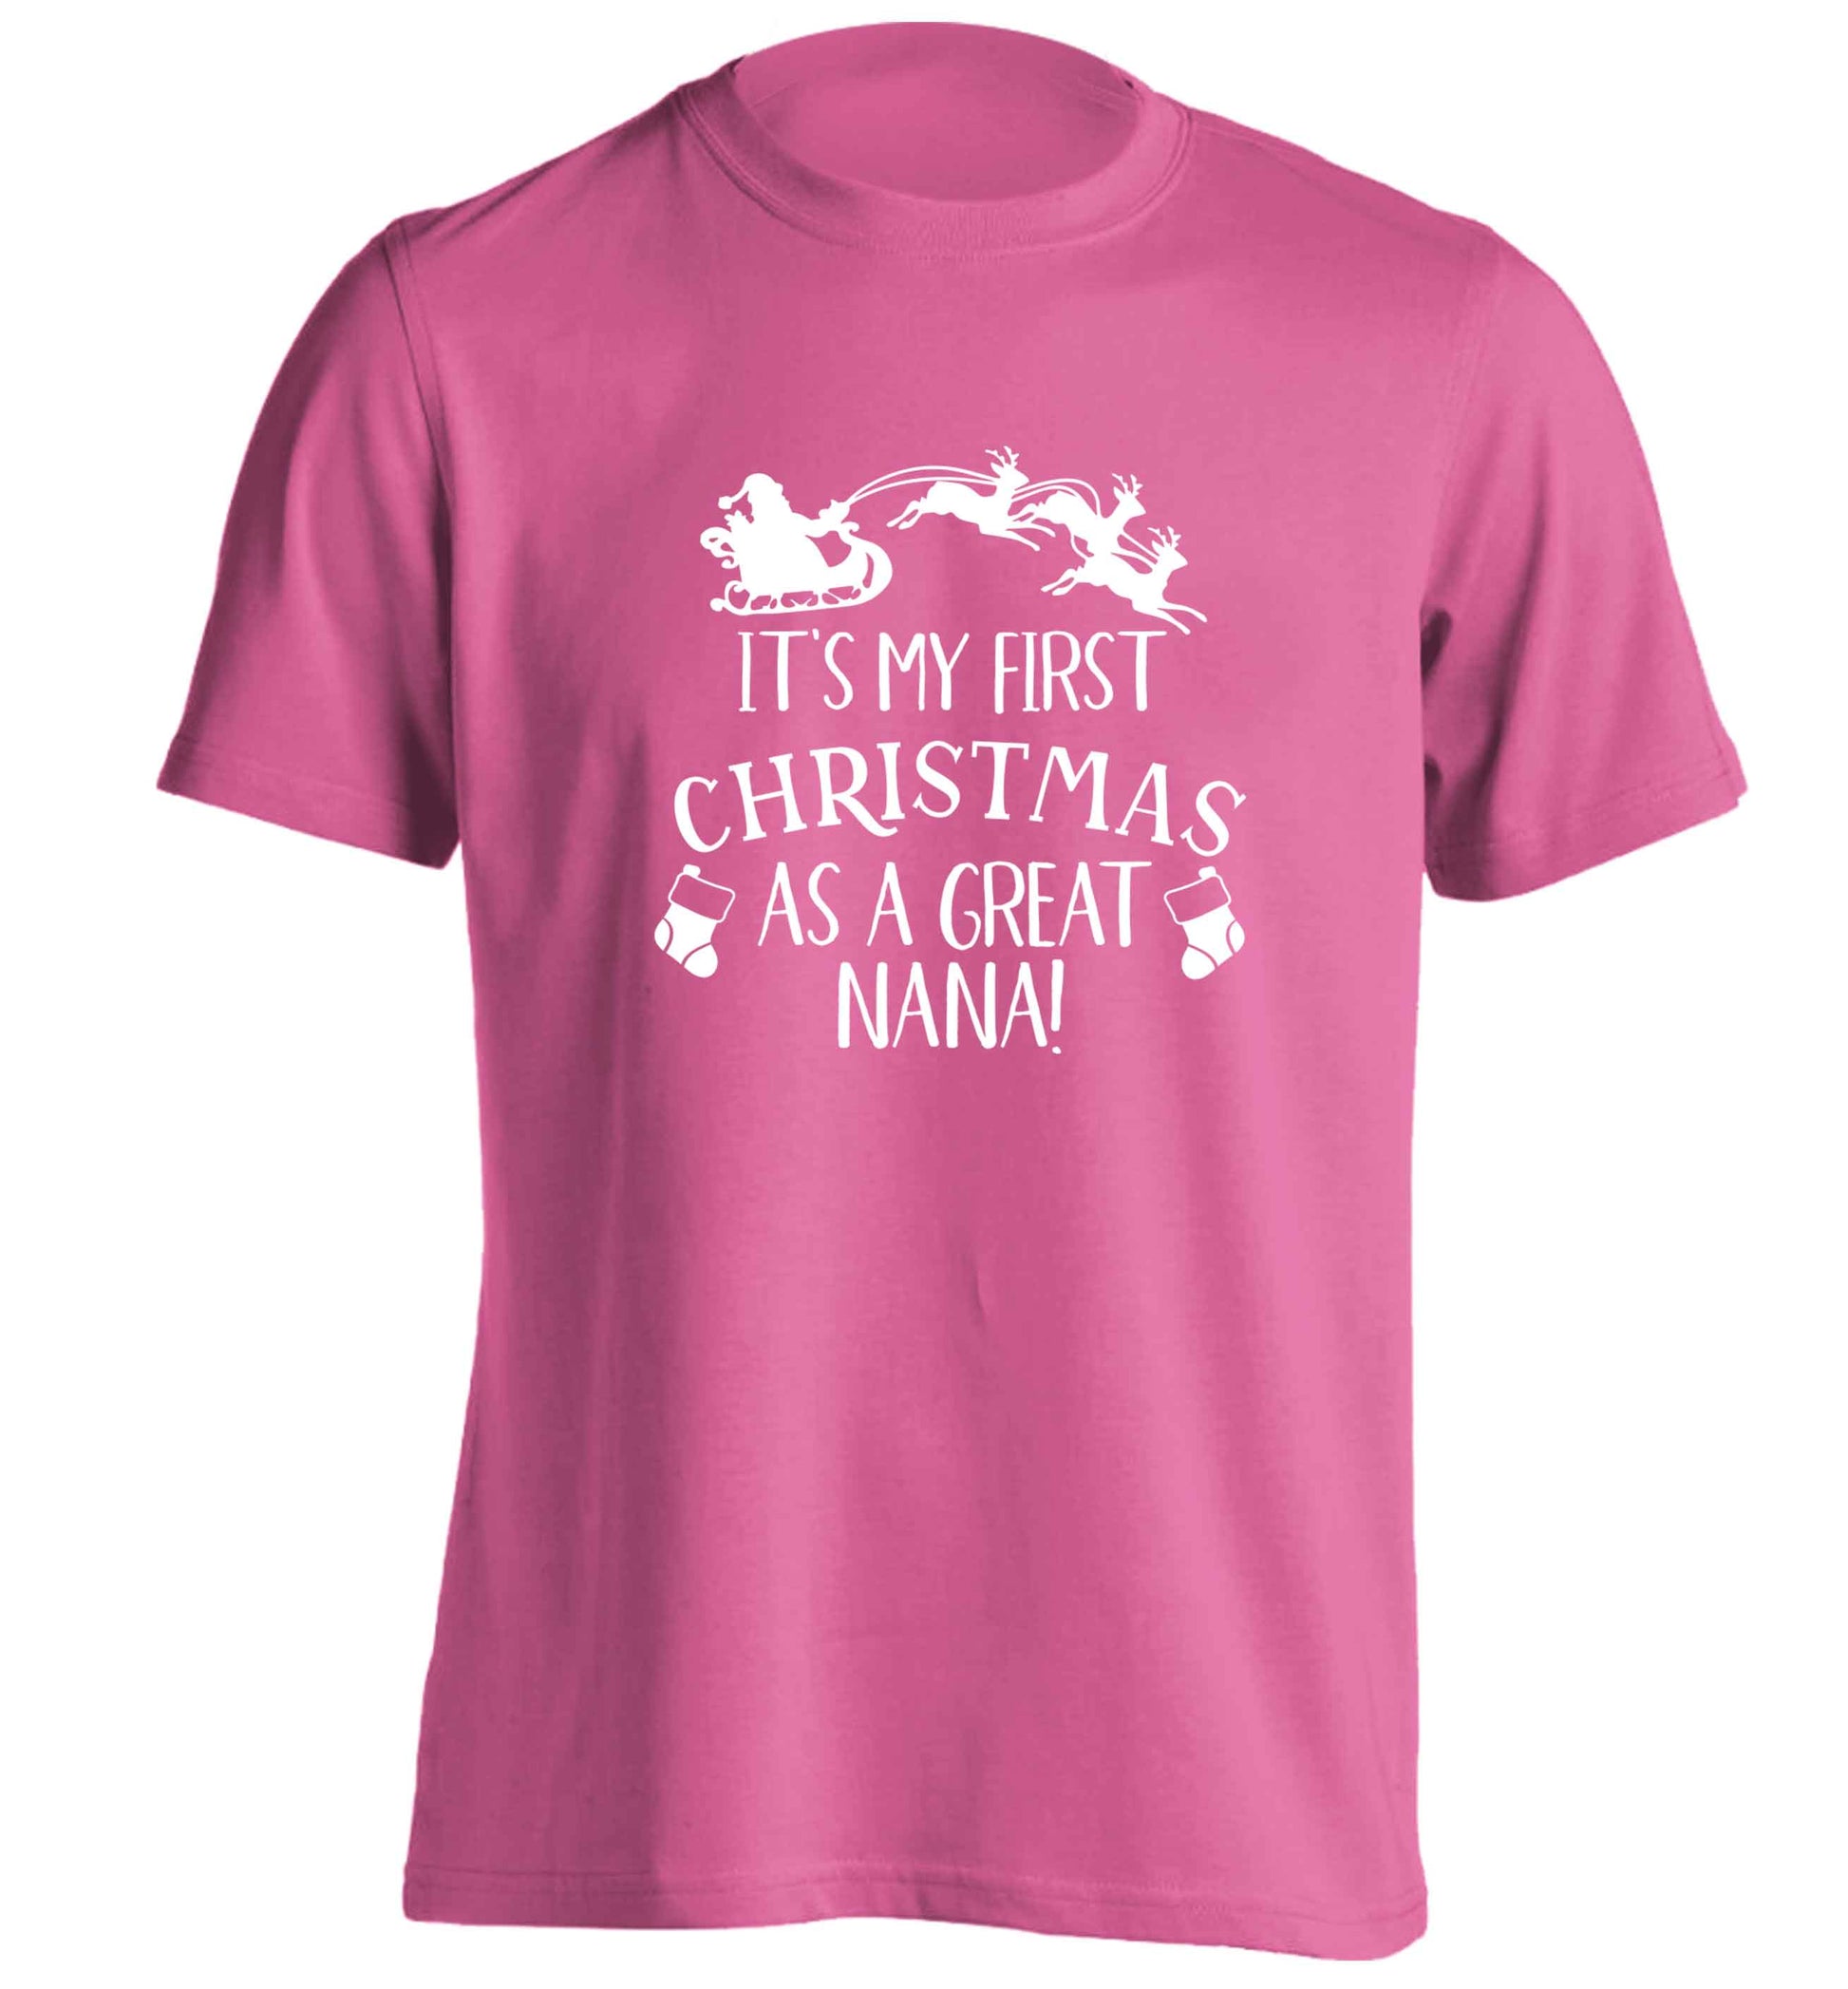 It's my first Christmas as a great nana! adults unisex pink Tshirt 2XL